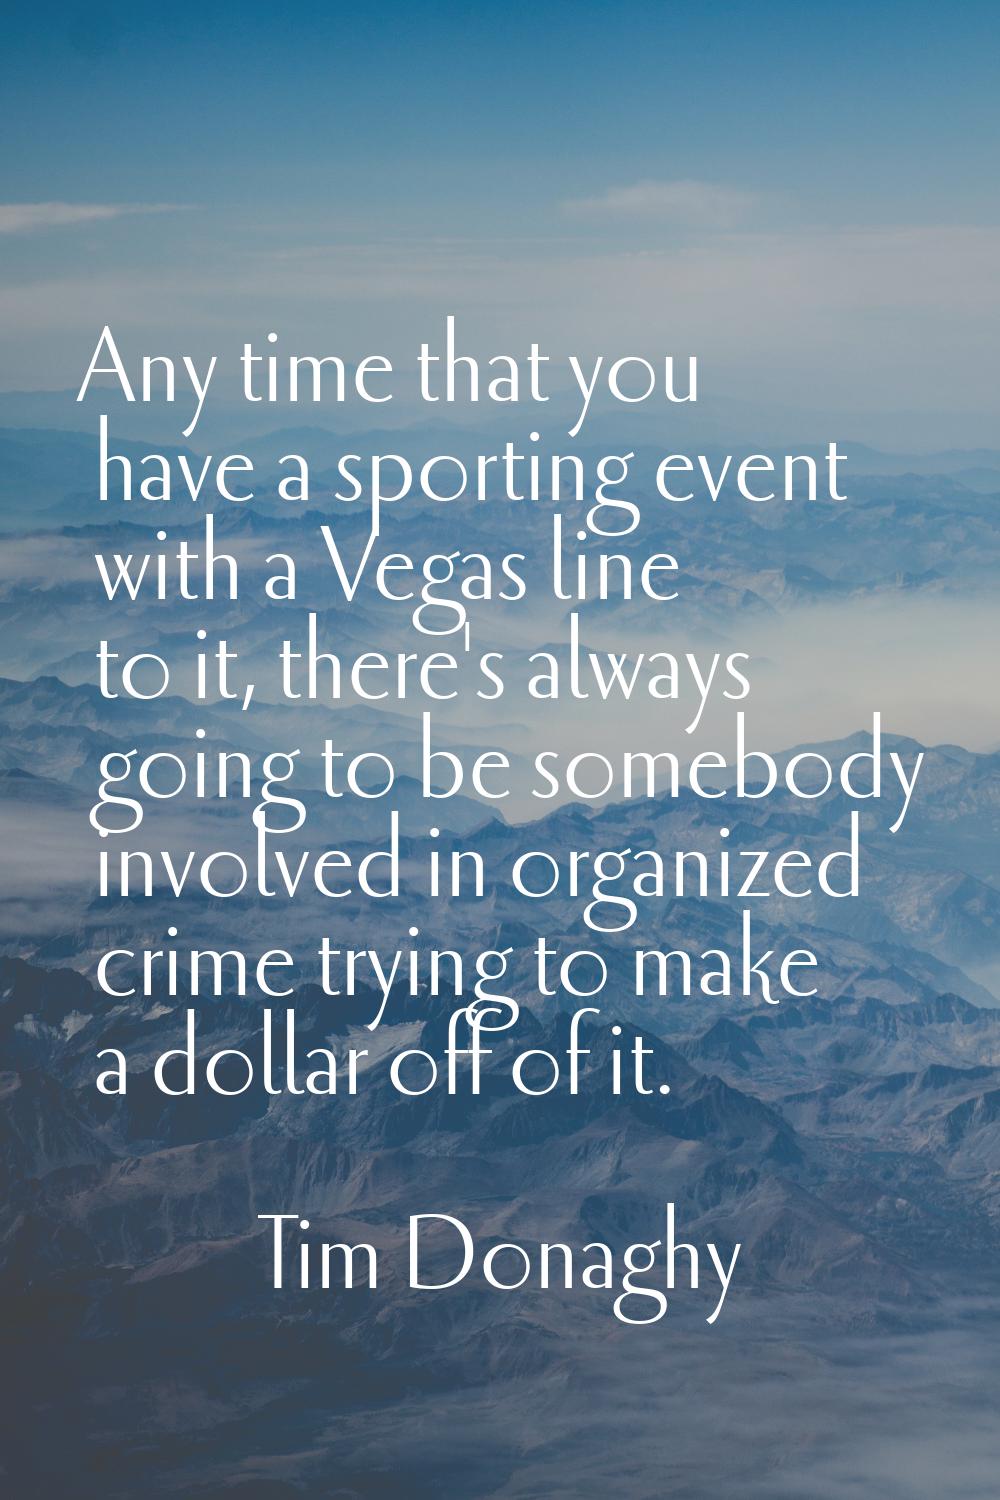 Any time that you have a sporting event with a Vegas line to it, there's always going to be somebod